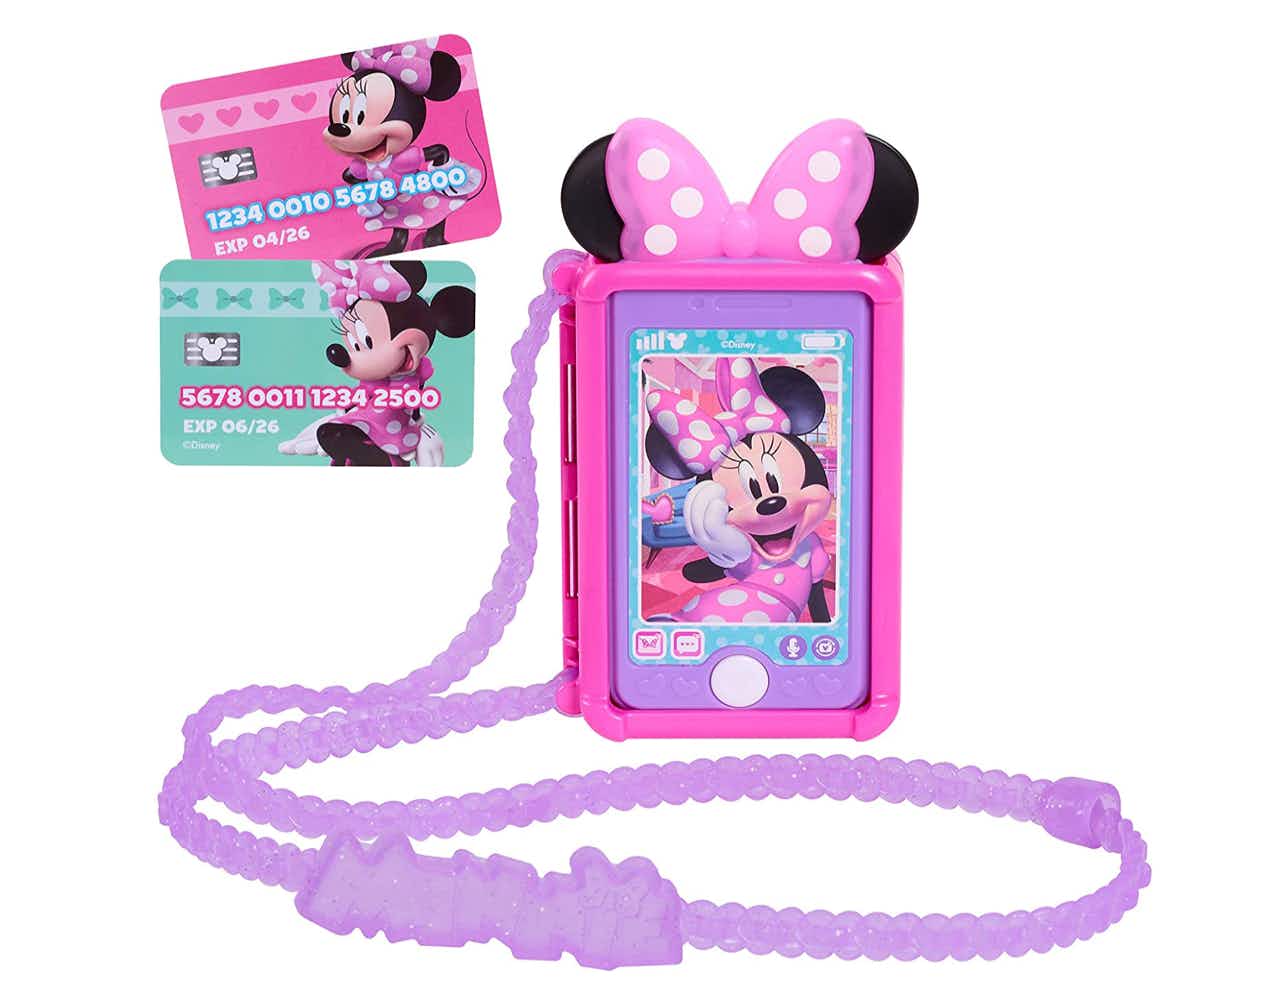 Minnie Mouse pink a purple cell phone toy set on a white background